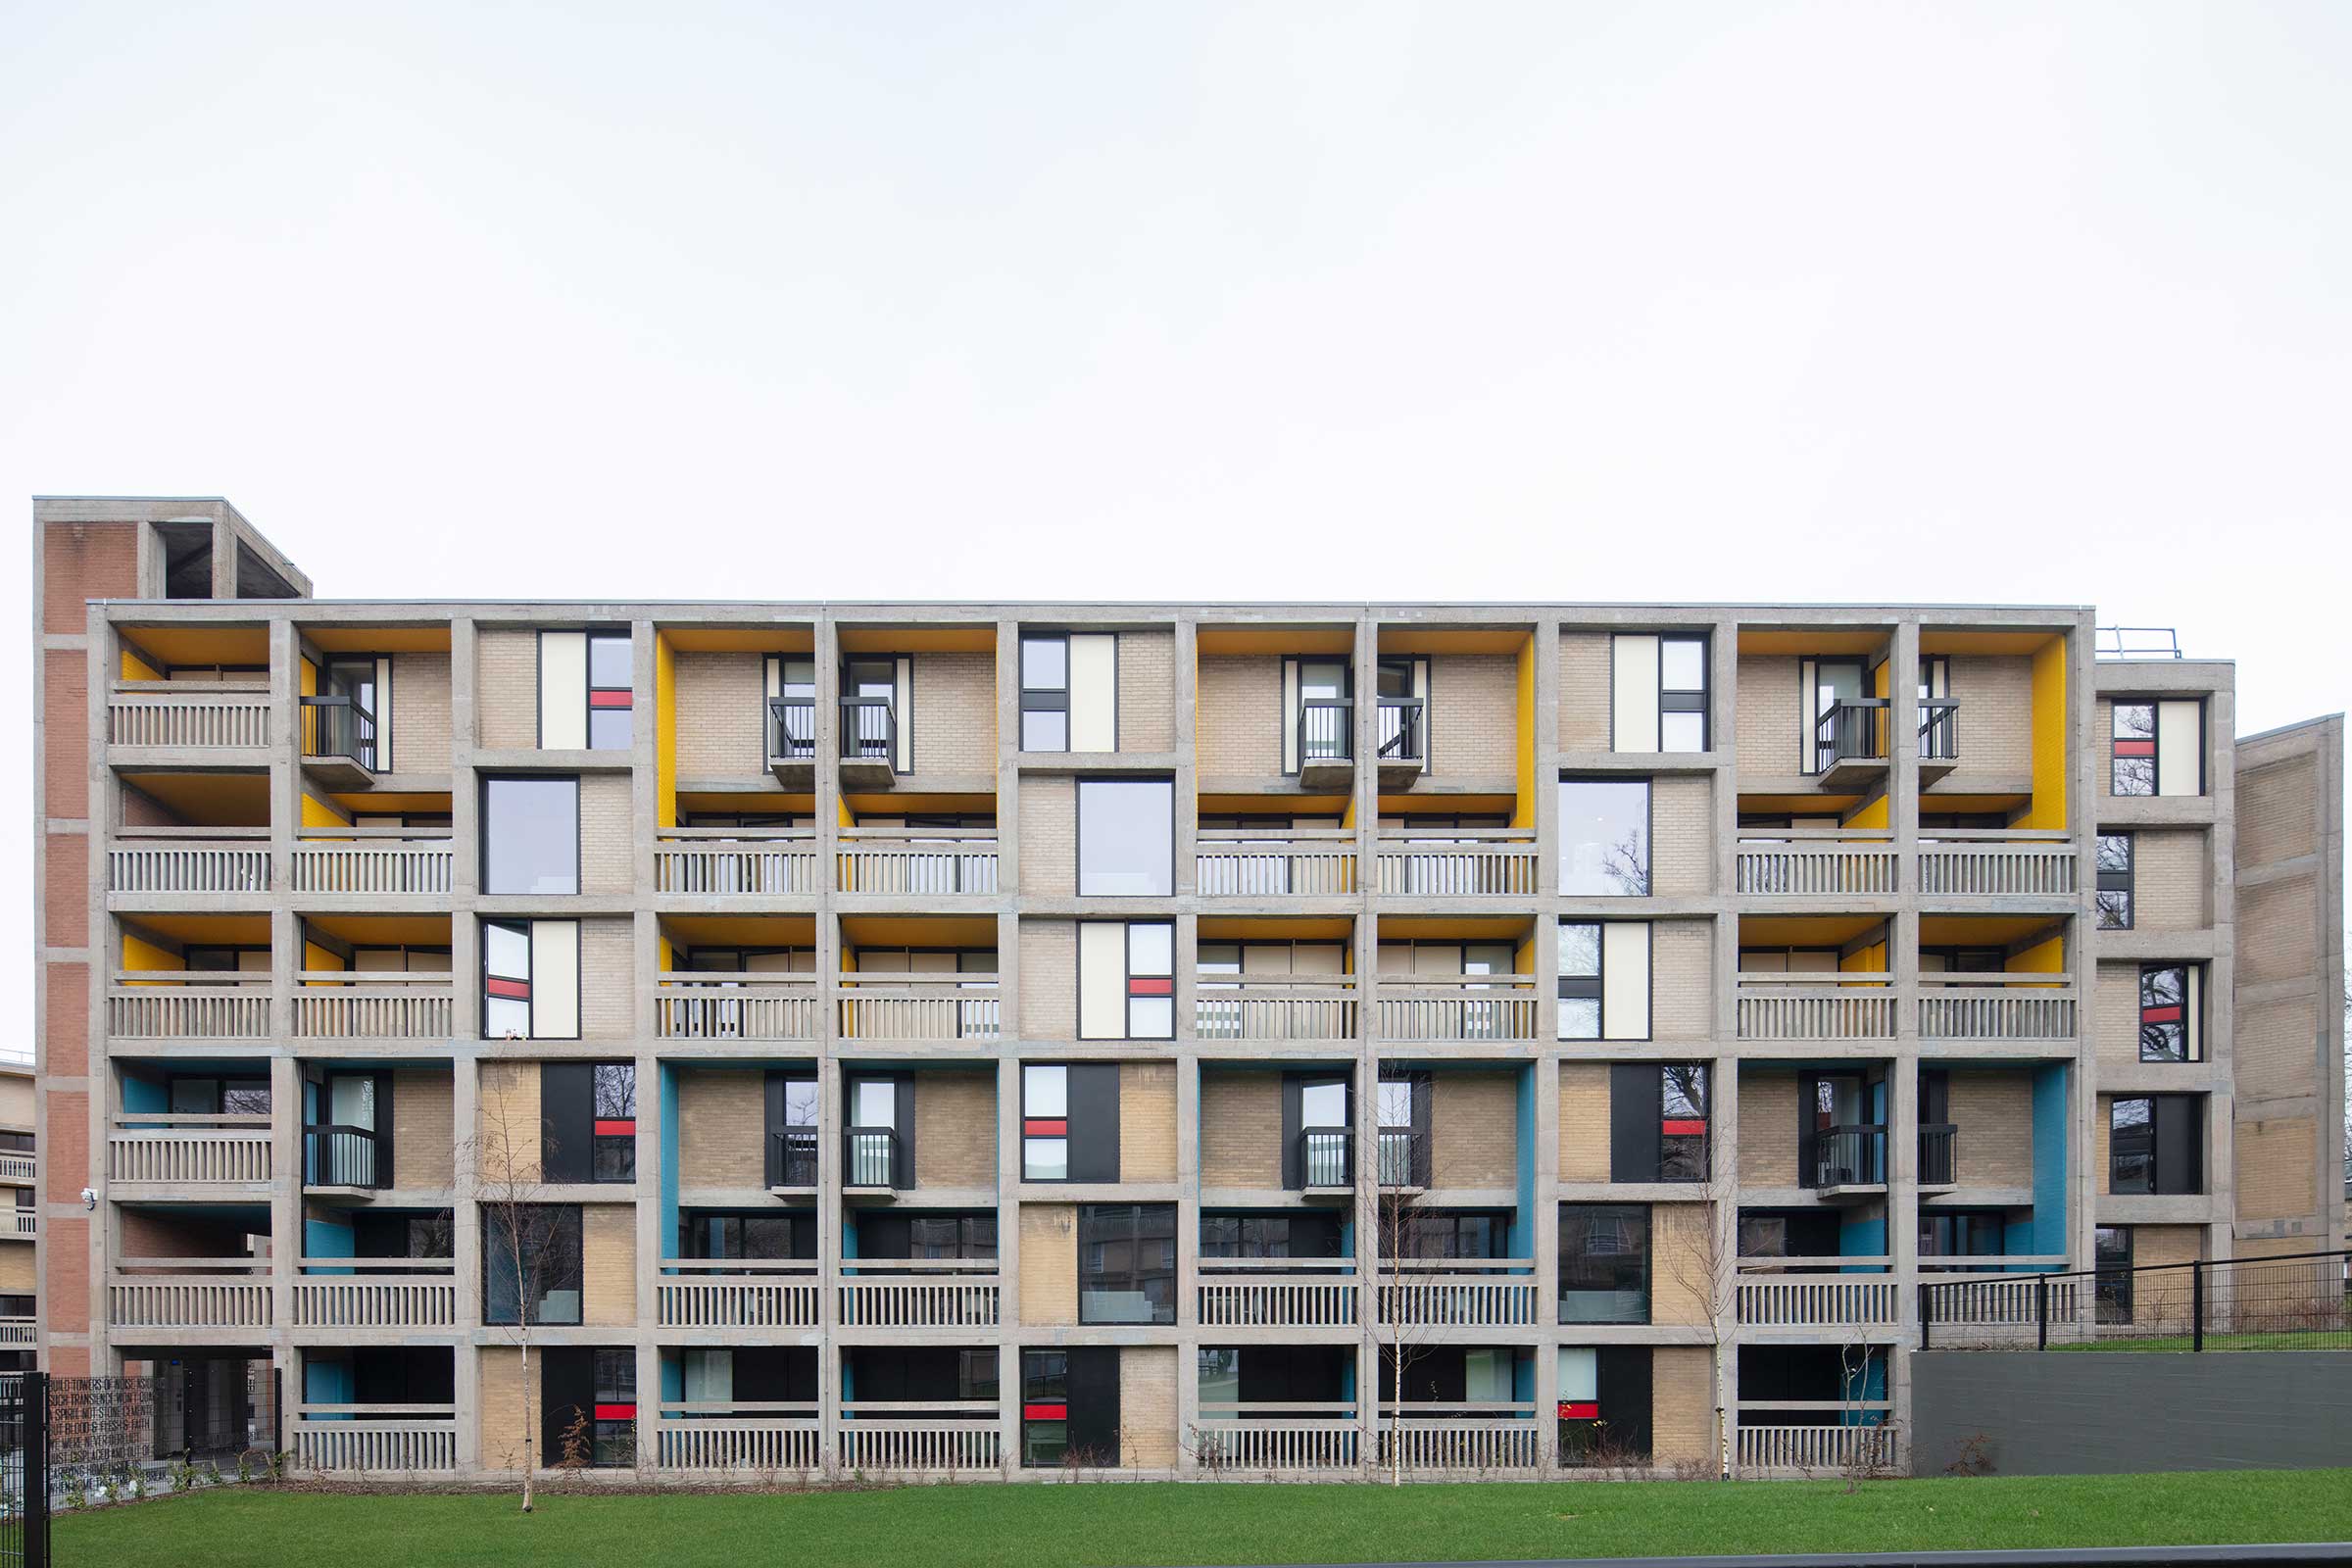 A brutalist appartment block that has been renovated with aluminium windows